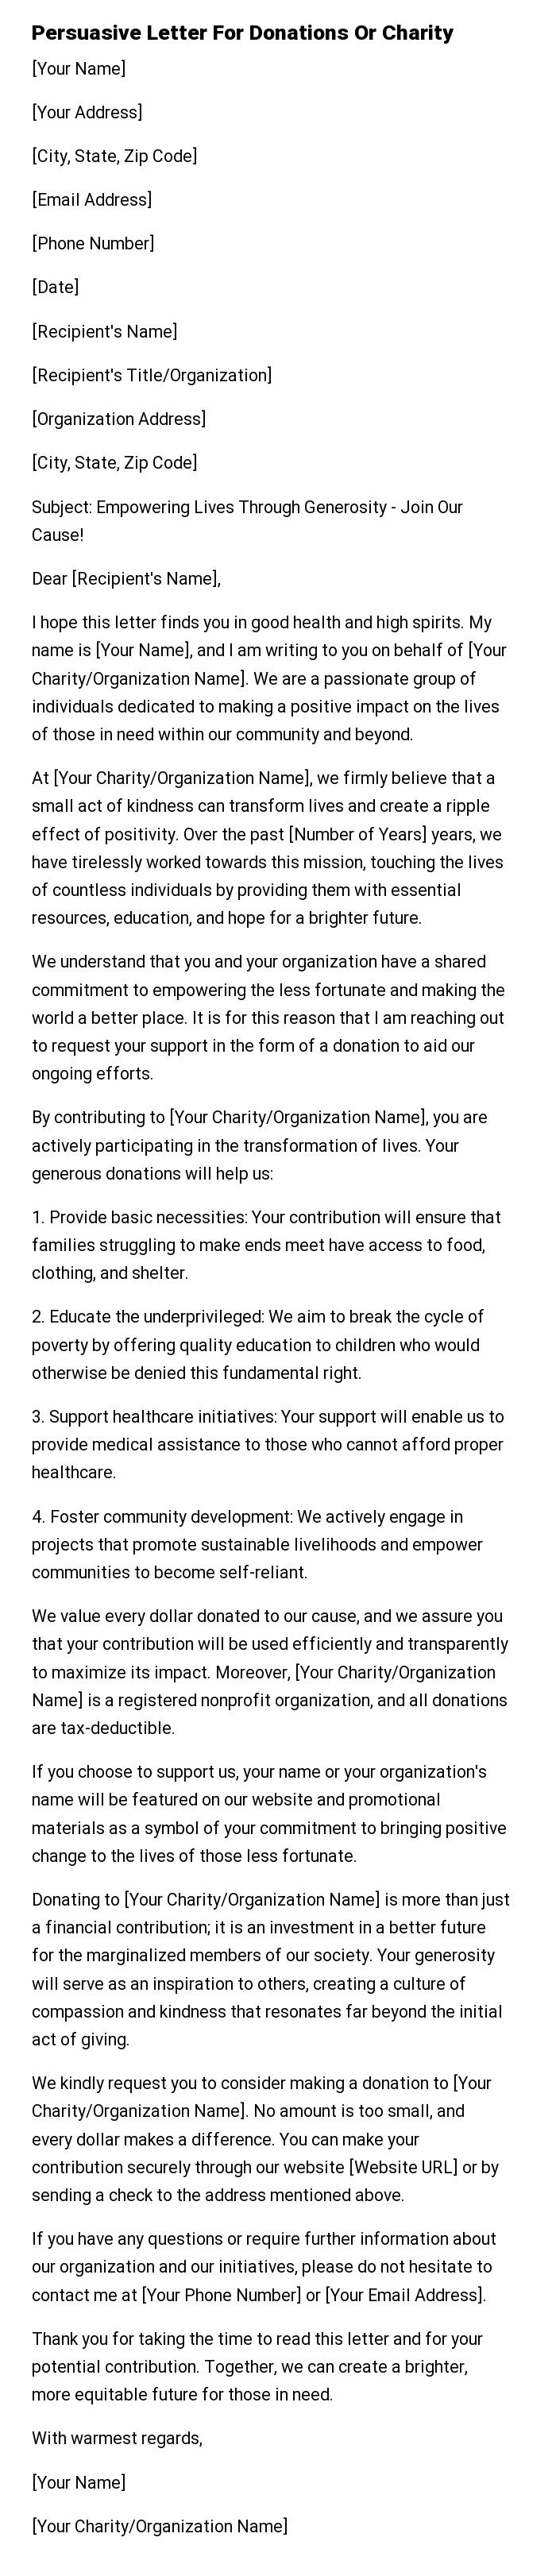 Persuasive Letter For Donations Or Charity